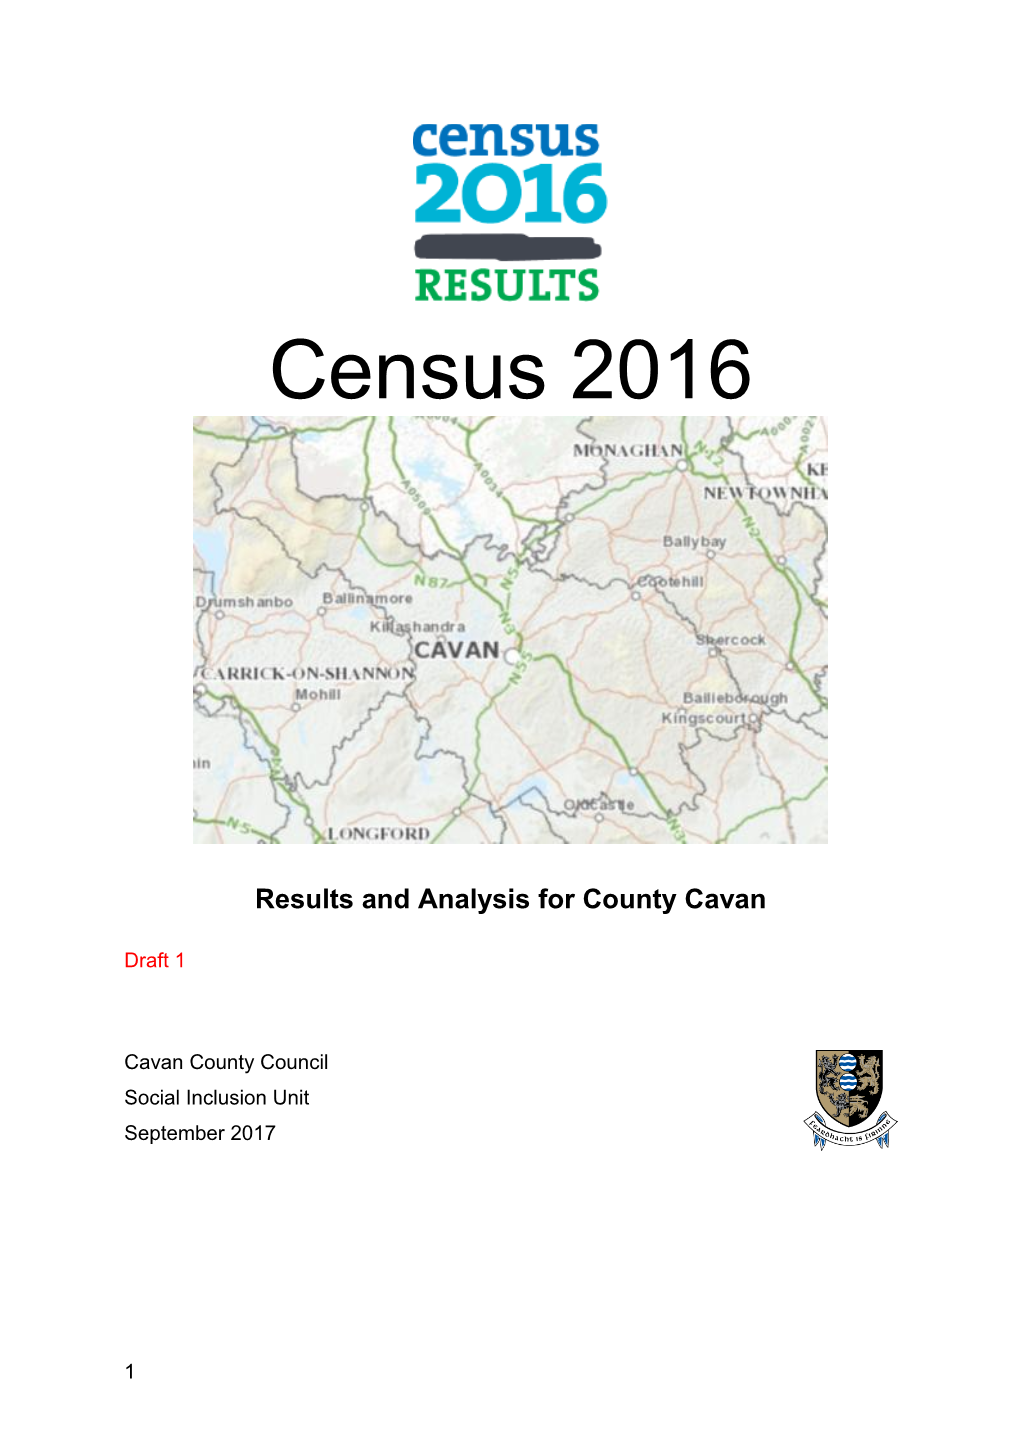 Results and Analysis for County Cavan